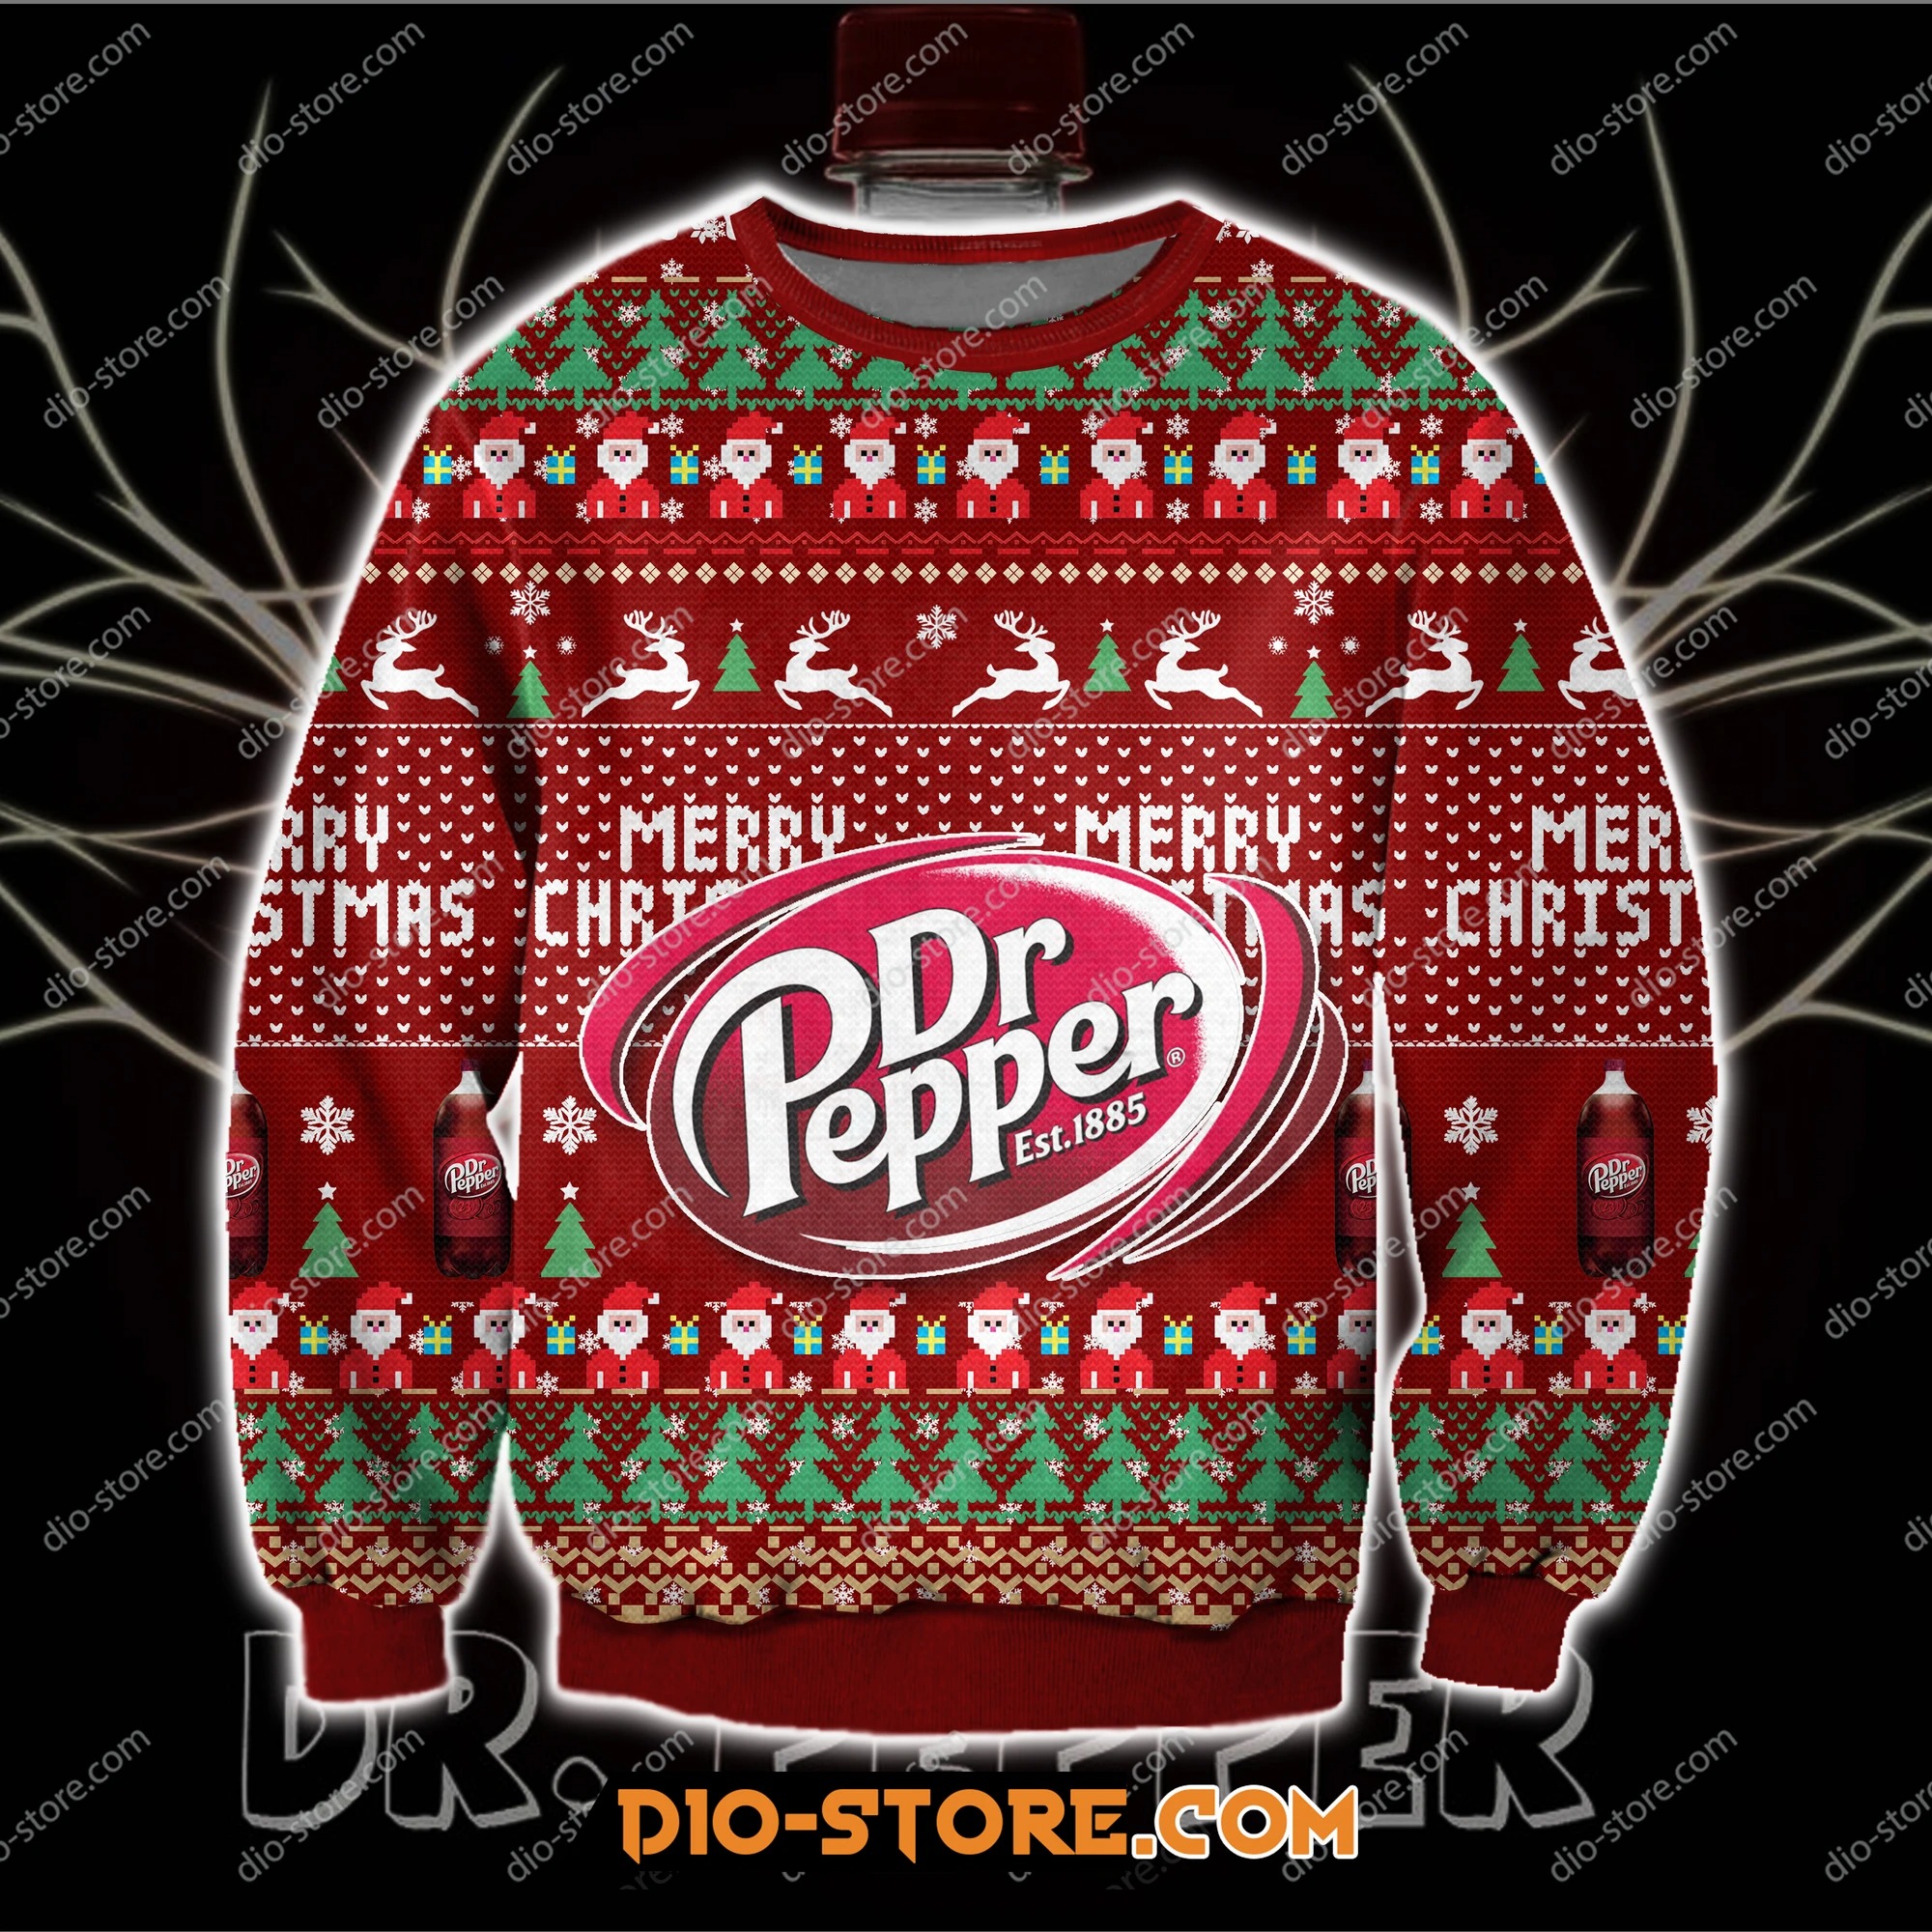 3D print knitting pattern DR pepper print ugly christmas sweater – LIMITED EDITION